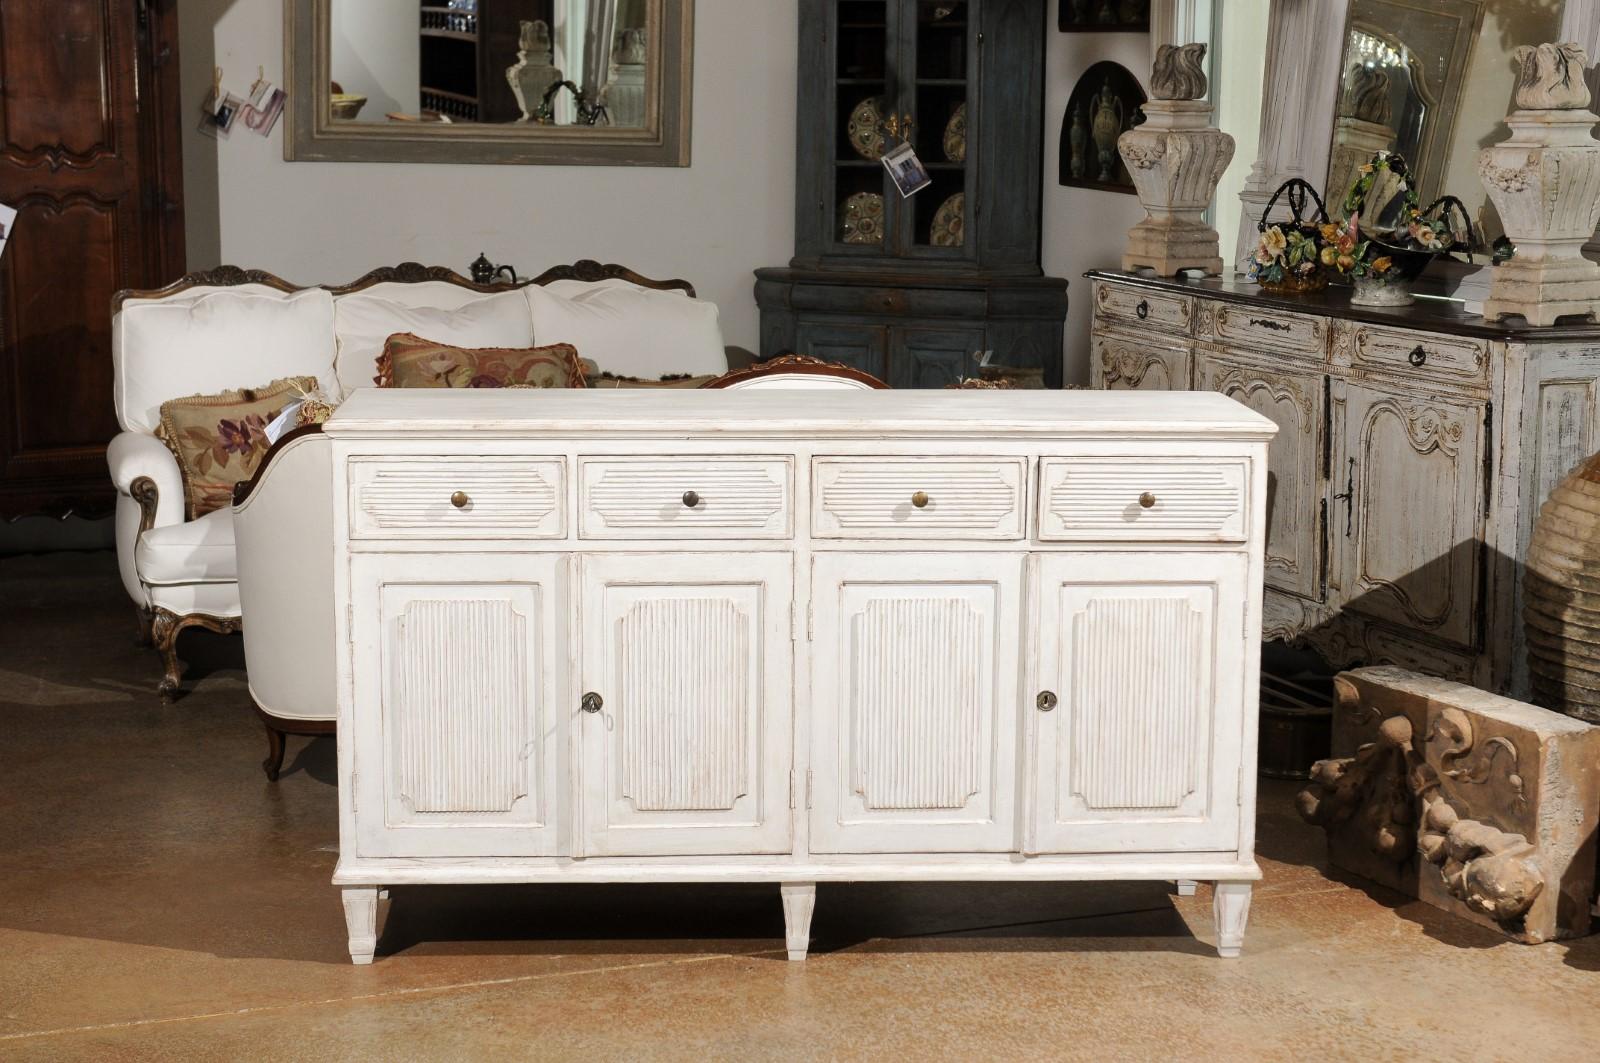 A Swedish painted wood sideboard from the 20th century, with reeded accents and four drawers over four doors. Born in Sweden during the 20th century, this exquisite painted sideboard features a rectangular top sitting above four drawers with reeded